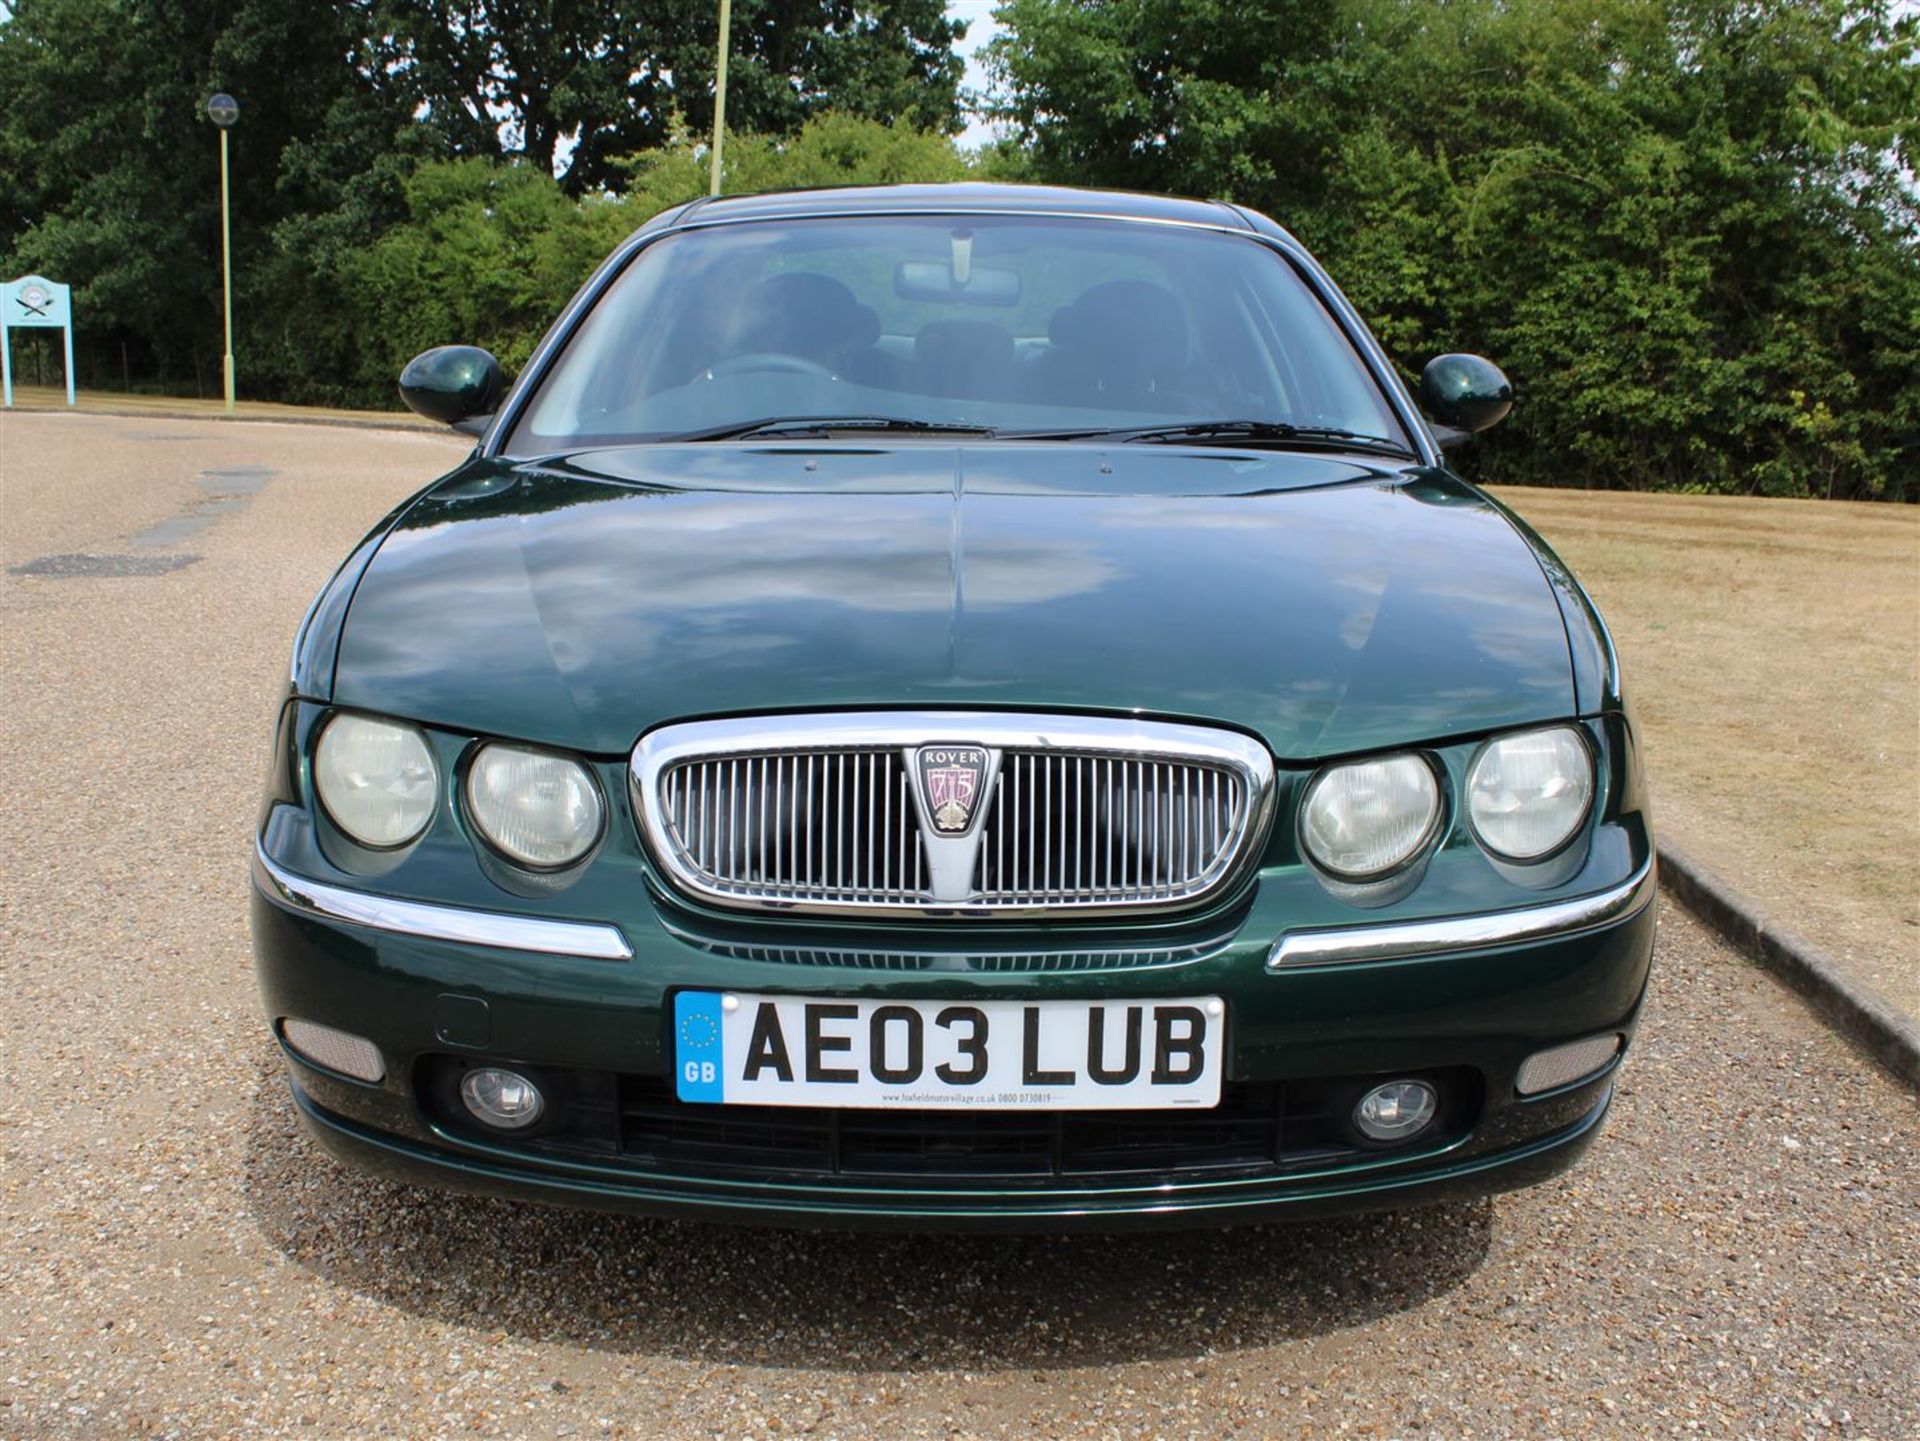 2003 Rover 75 Club 1.8 SE 37,028 miles from new - Image 2 of 29